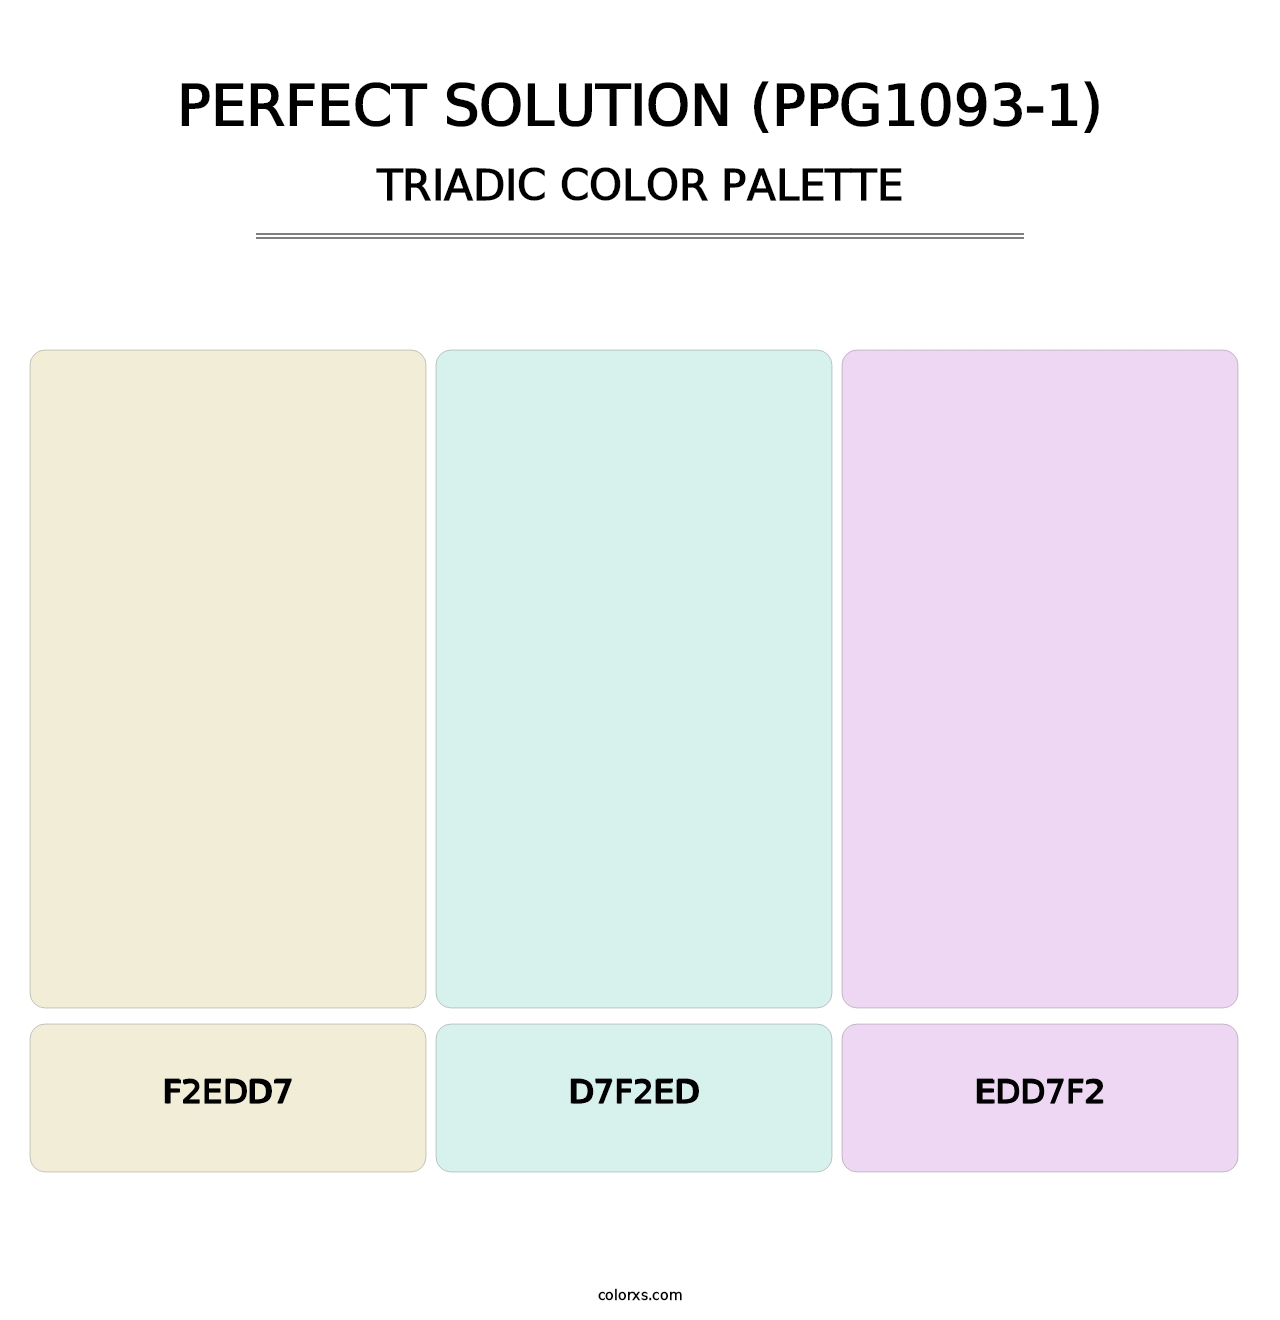 Perfect Solution (PPG1093-1) - Triadic Color Palette